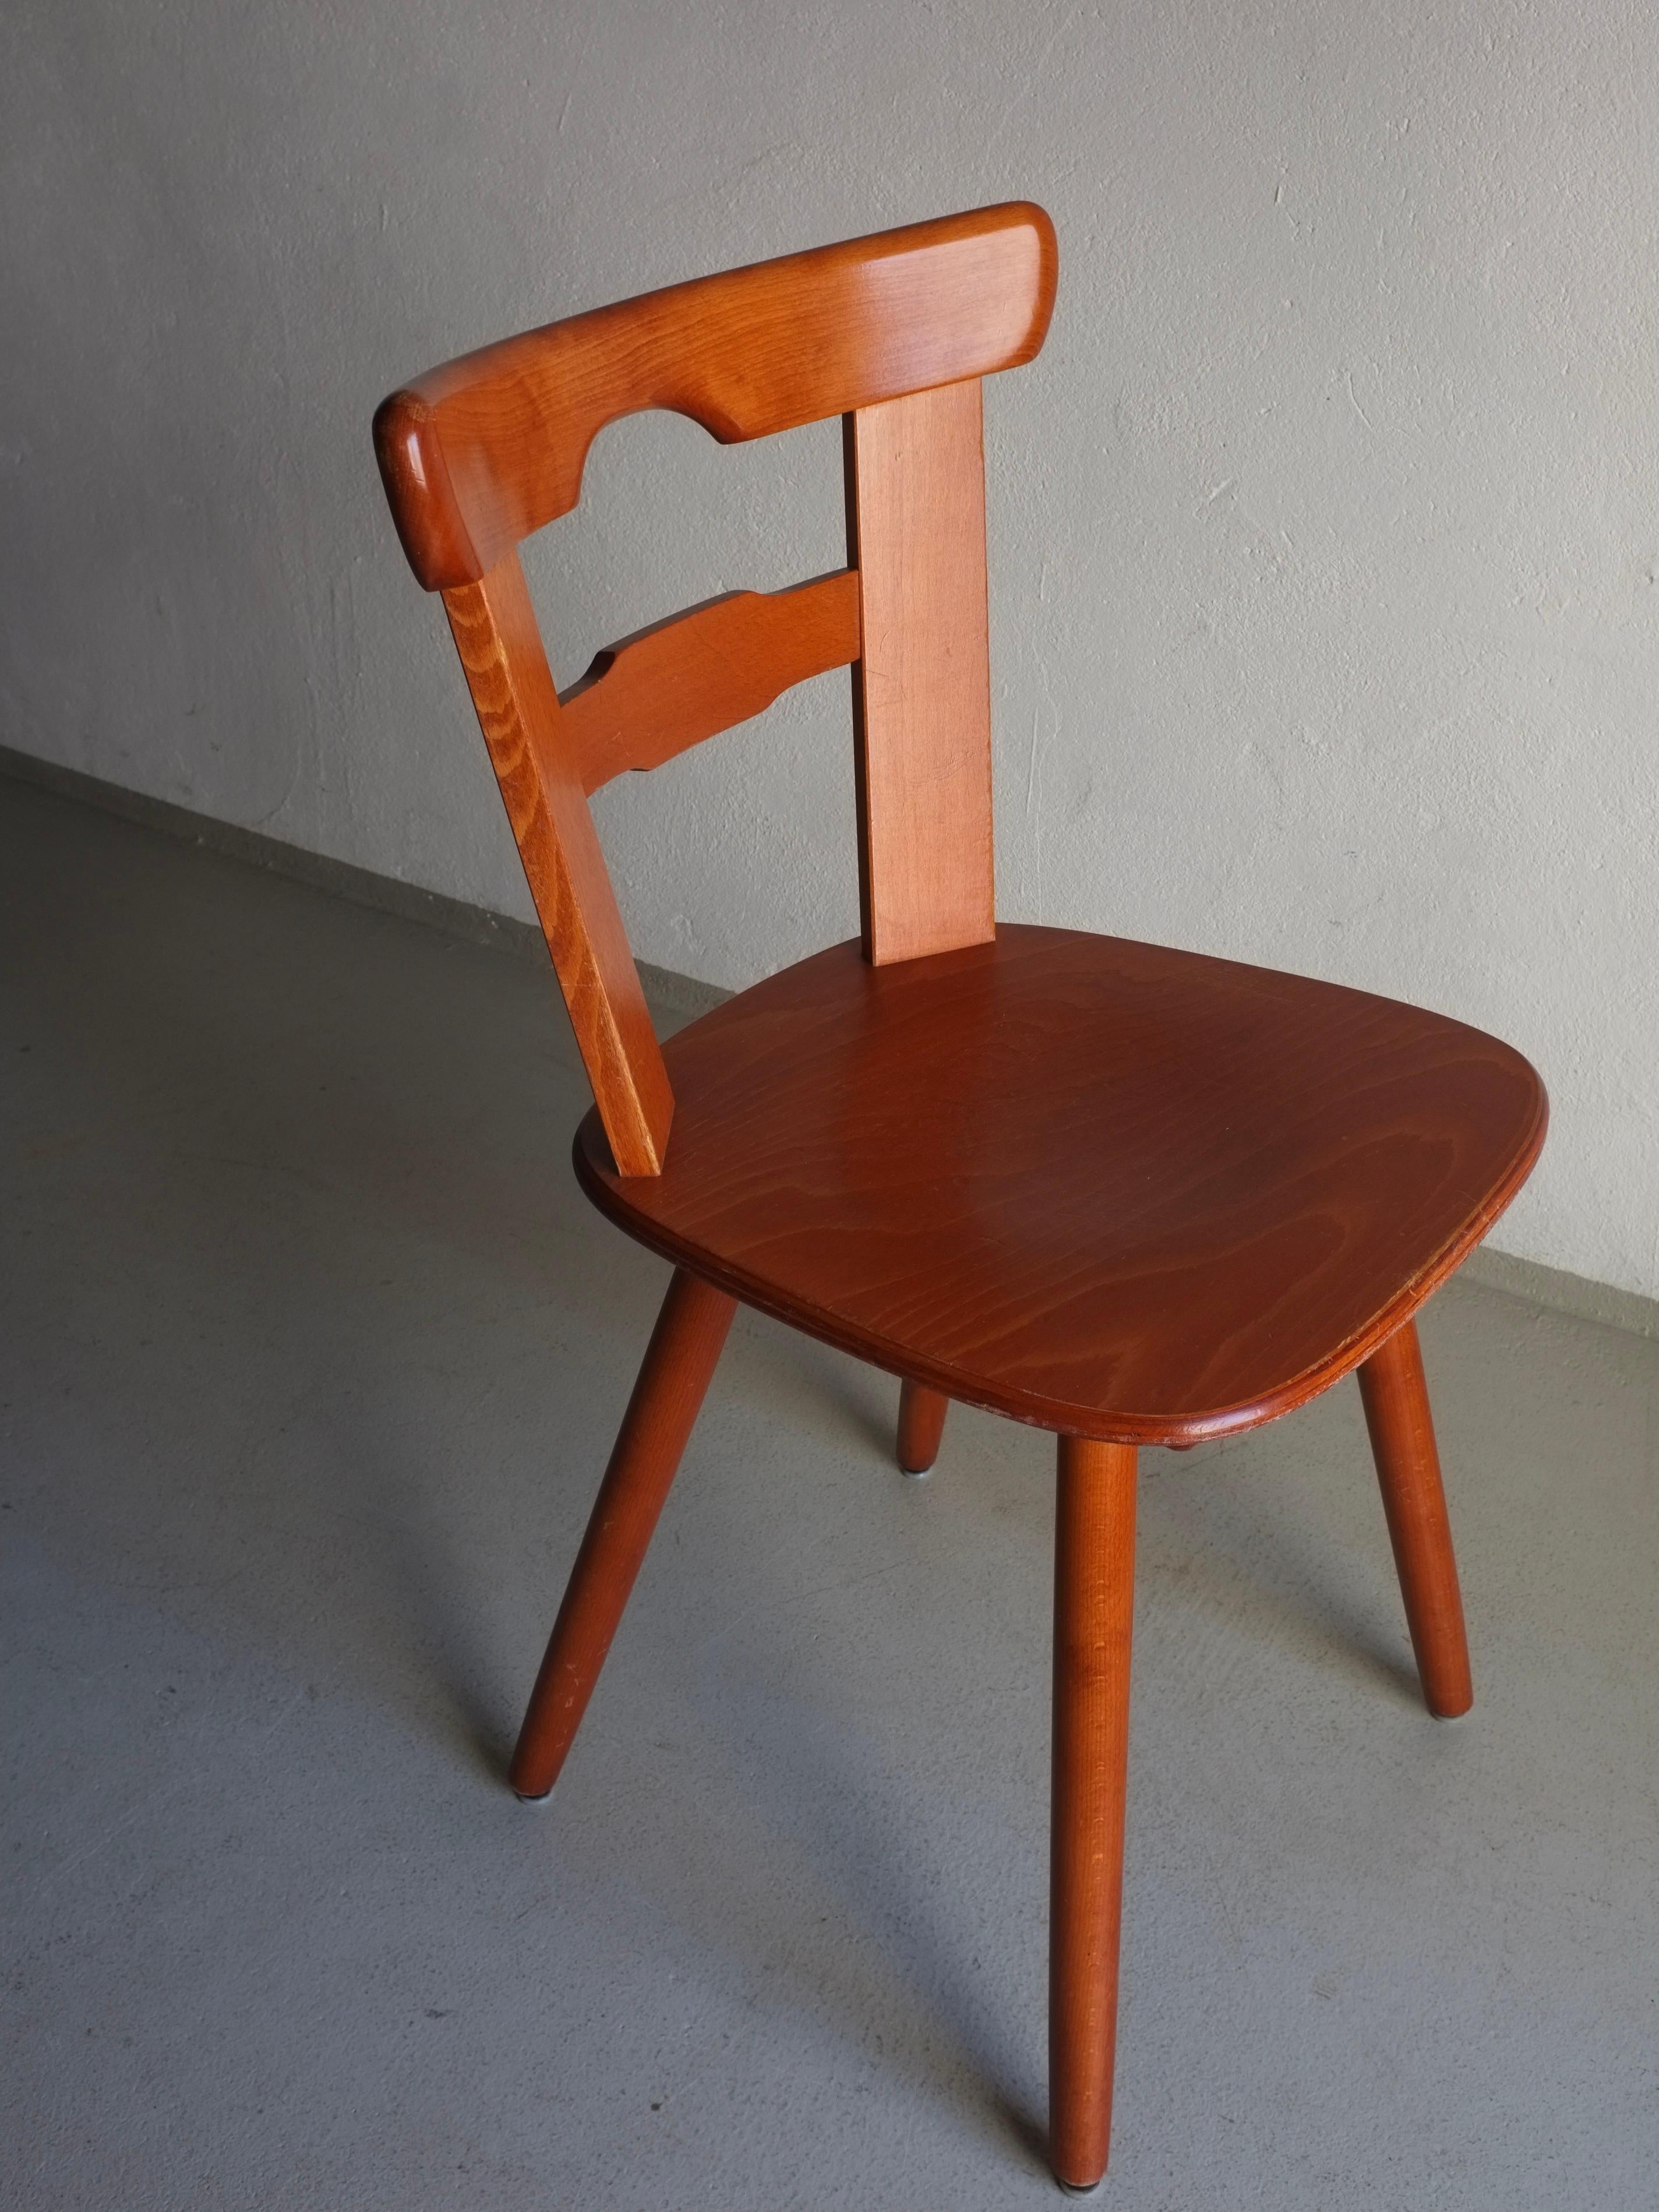 6 Carved Wood Dining Chairs, Netherlands, 1970s For Sale 1